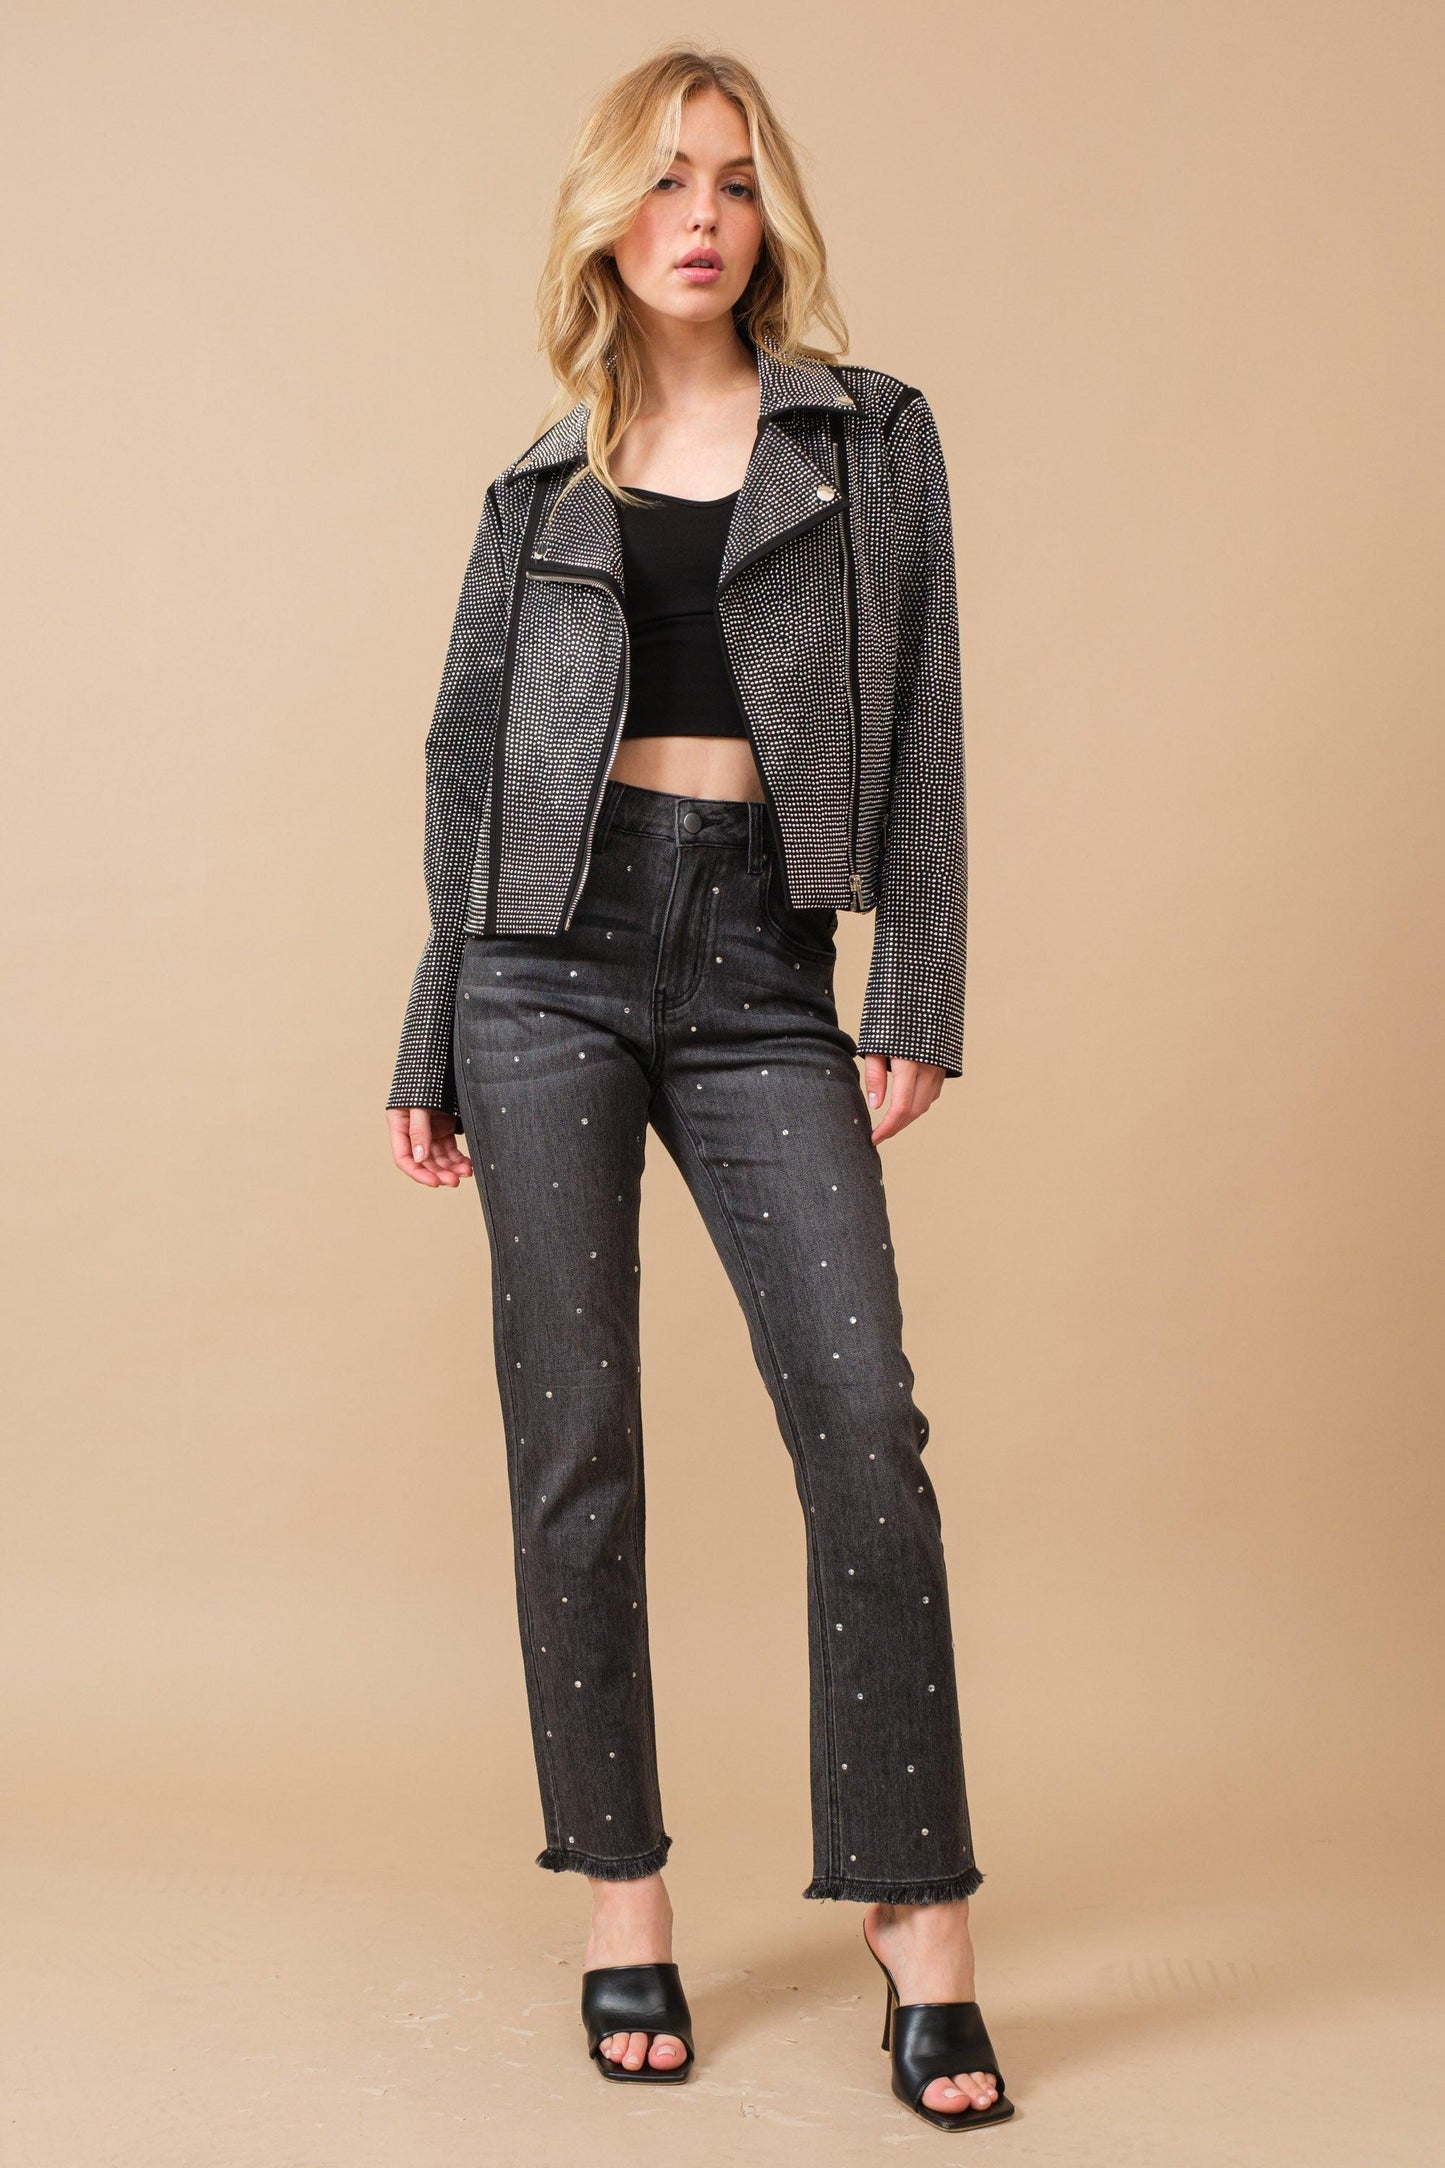 rhinestone studded moto jacket - RK Collections Boutique